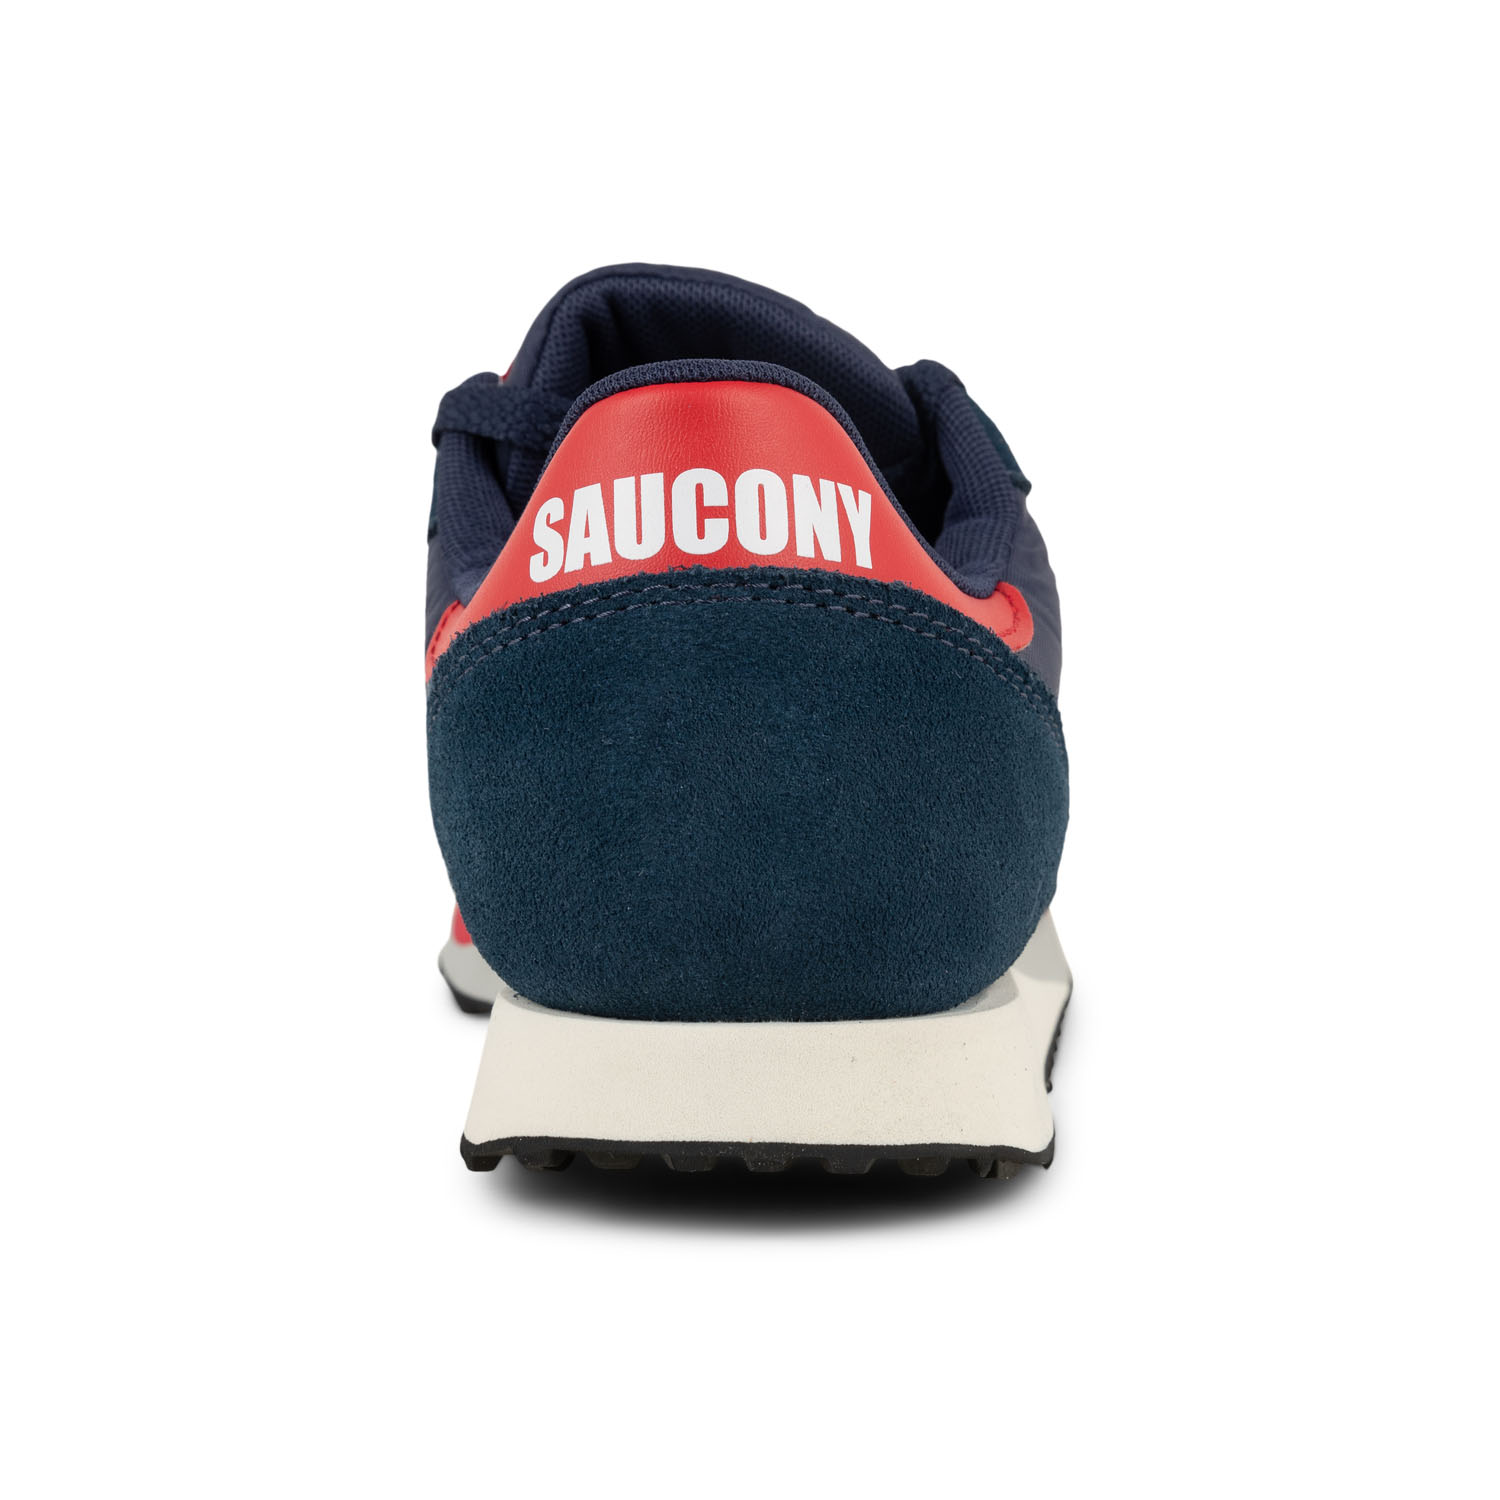 03 - DX TRAINER - SAUCONY - Baskets - Cuir / synthétique